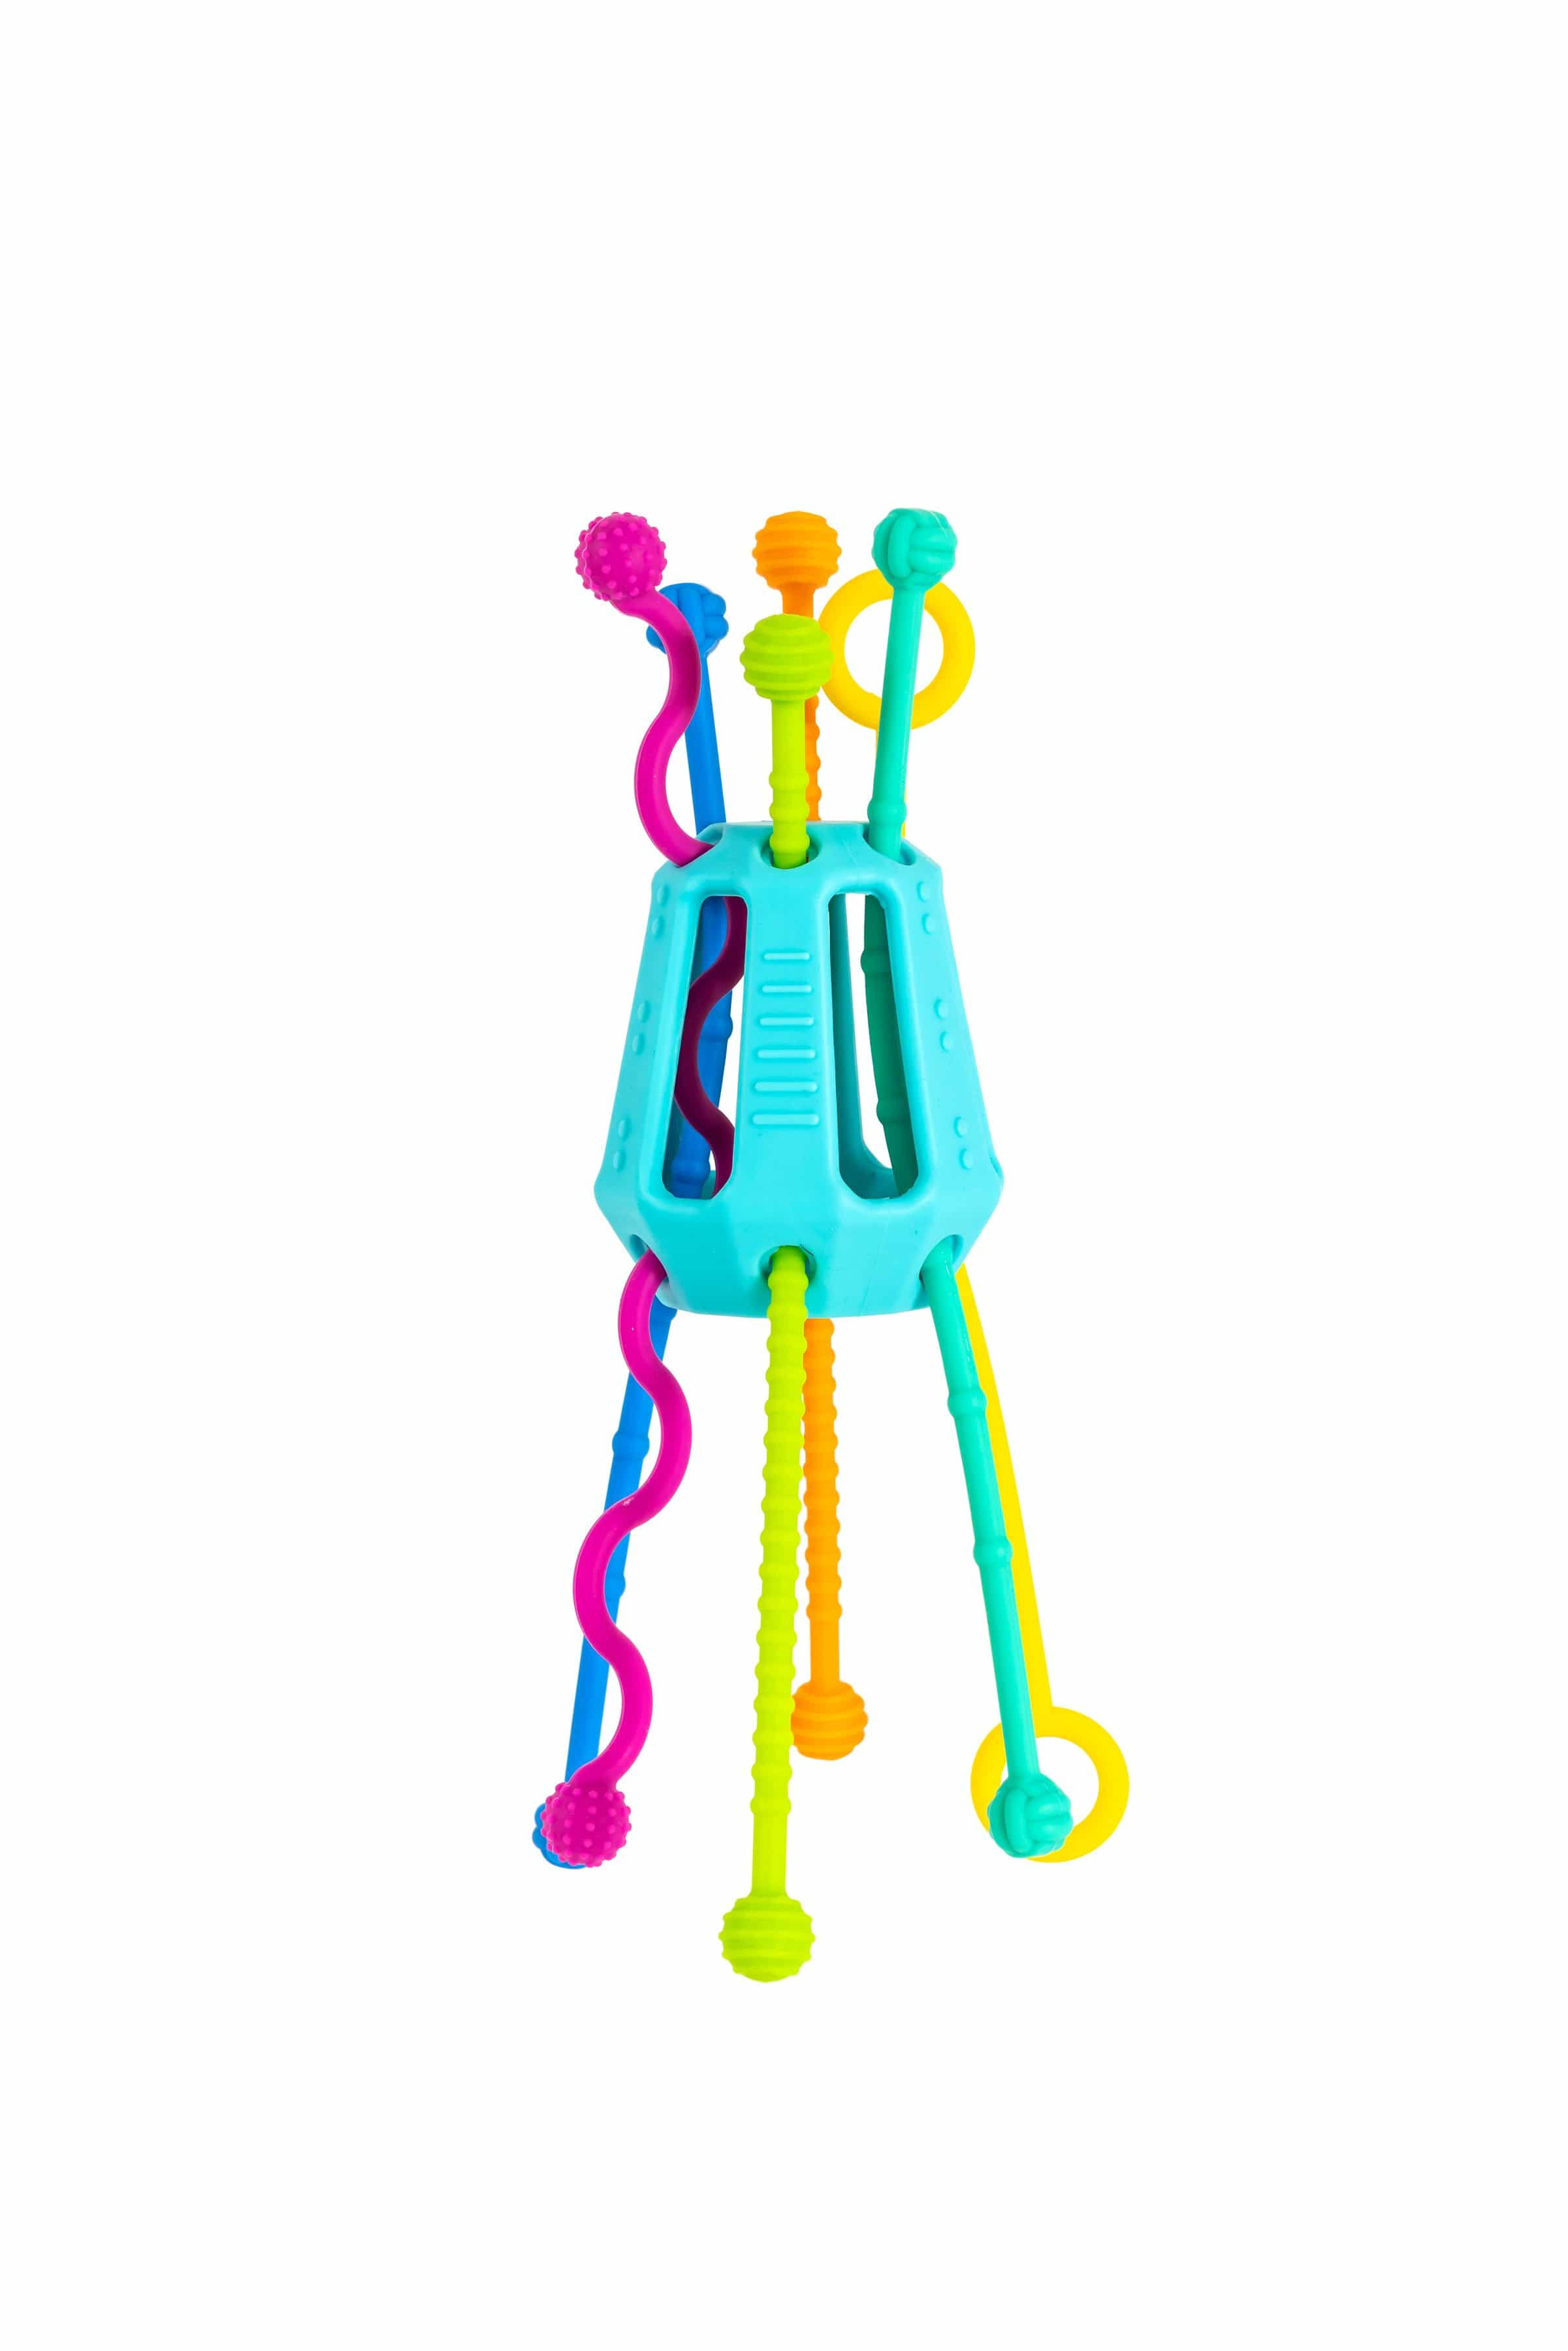 MOBI ZIPPEE - Activity Toy for Sensory Development for Toddlers -